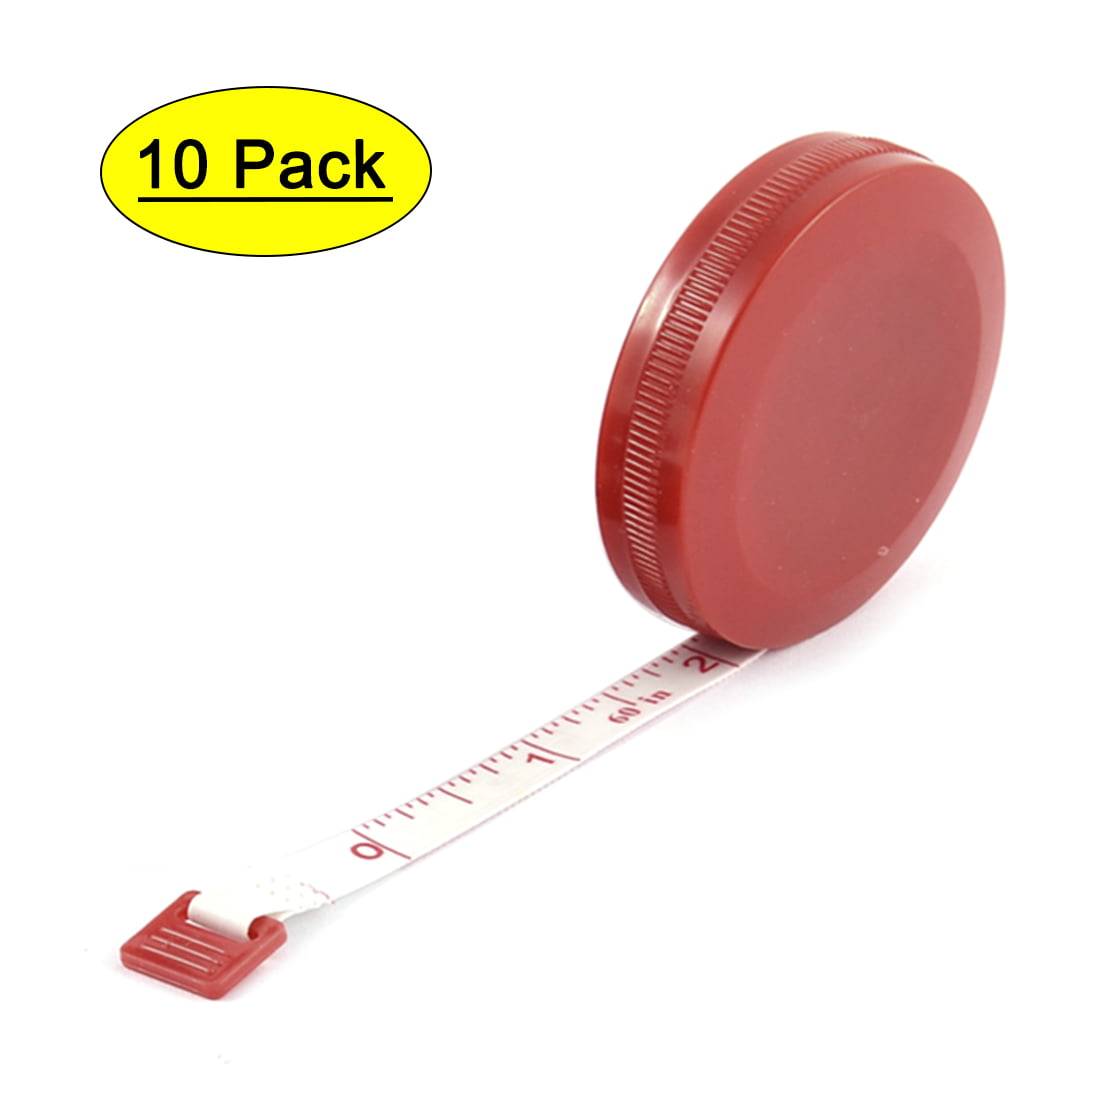 Tailor Sewing Round Shell Retractable Double Side Measuring Tape Ruler 10pcs 